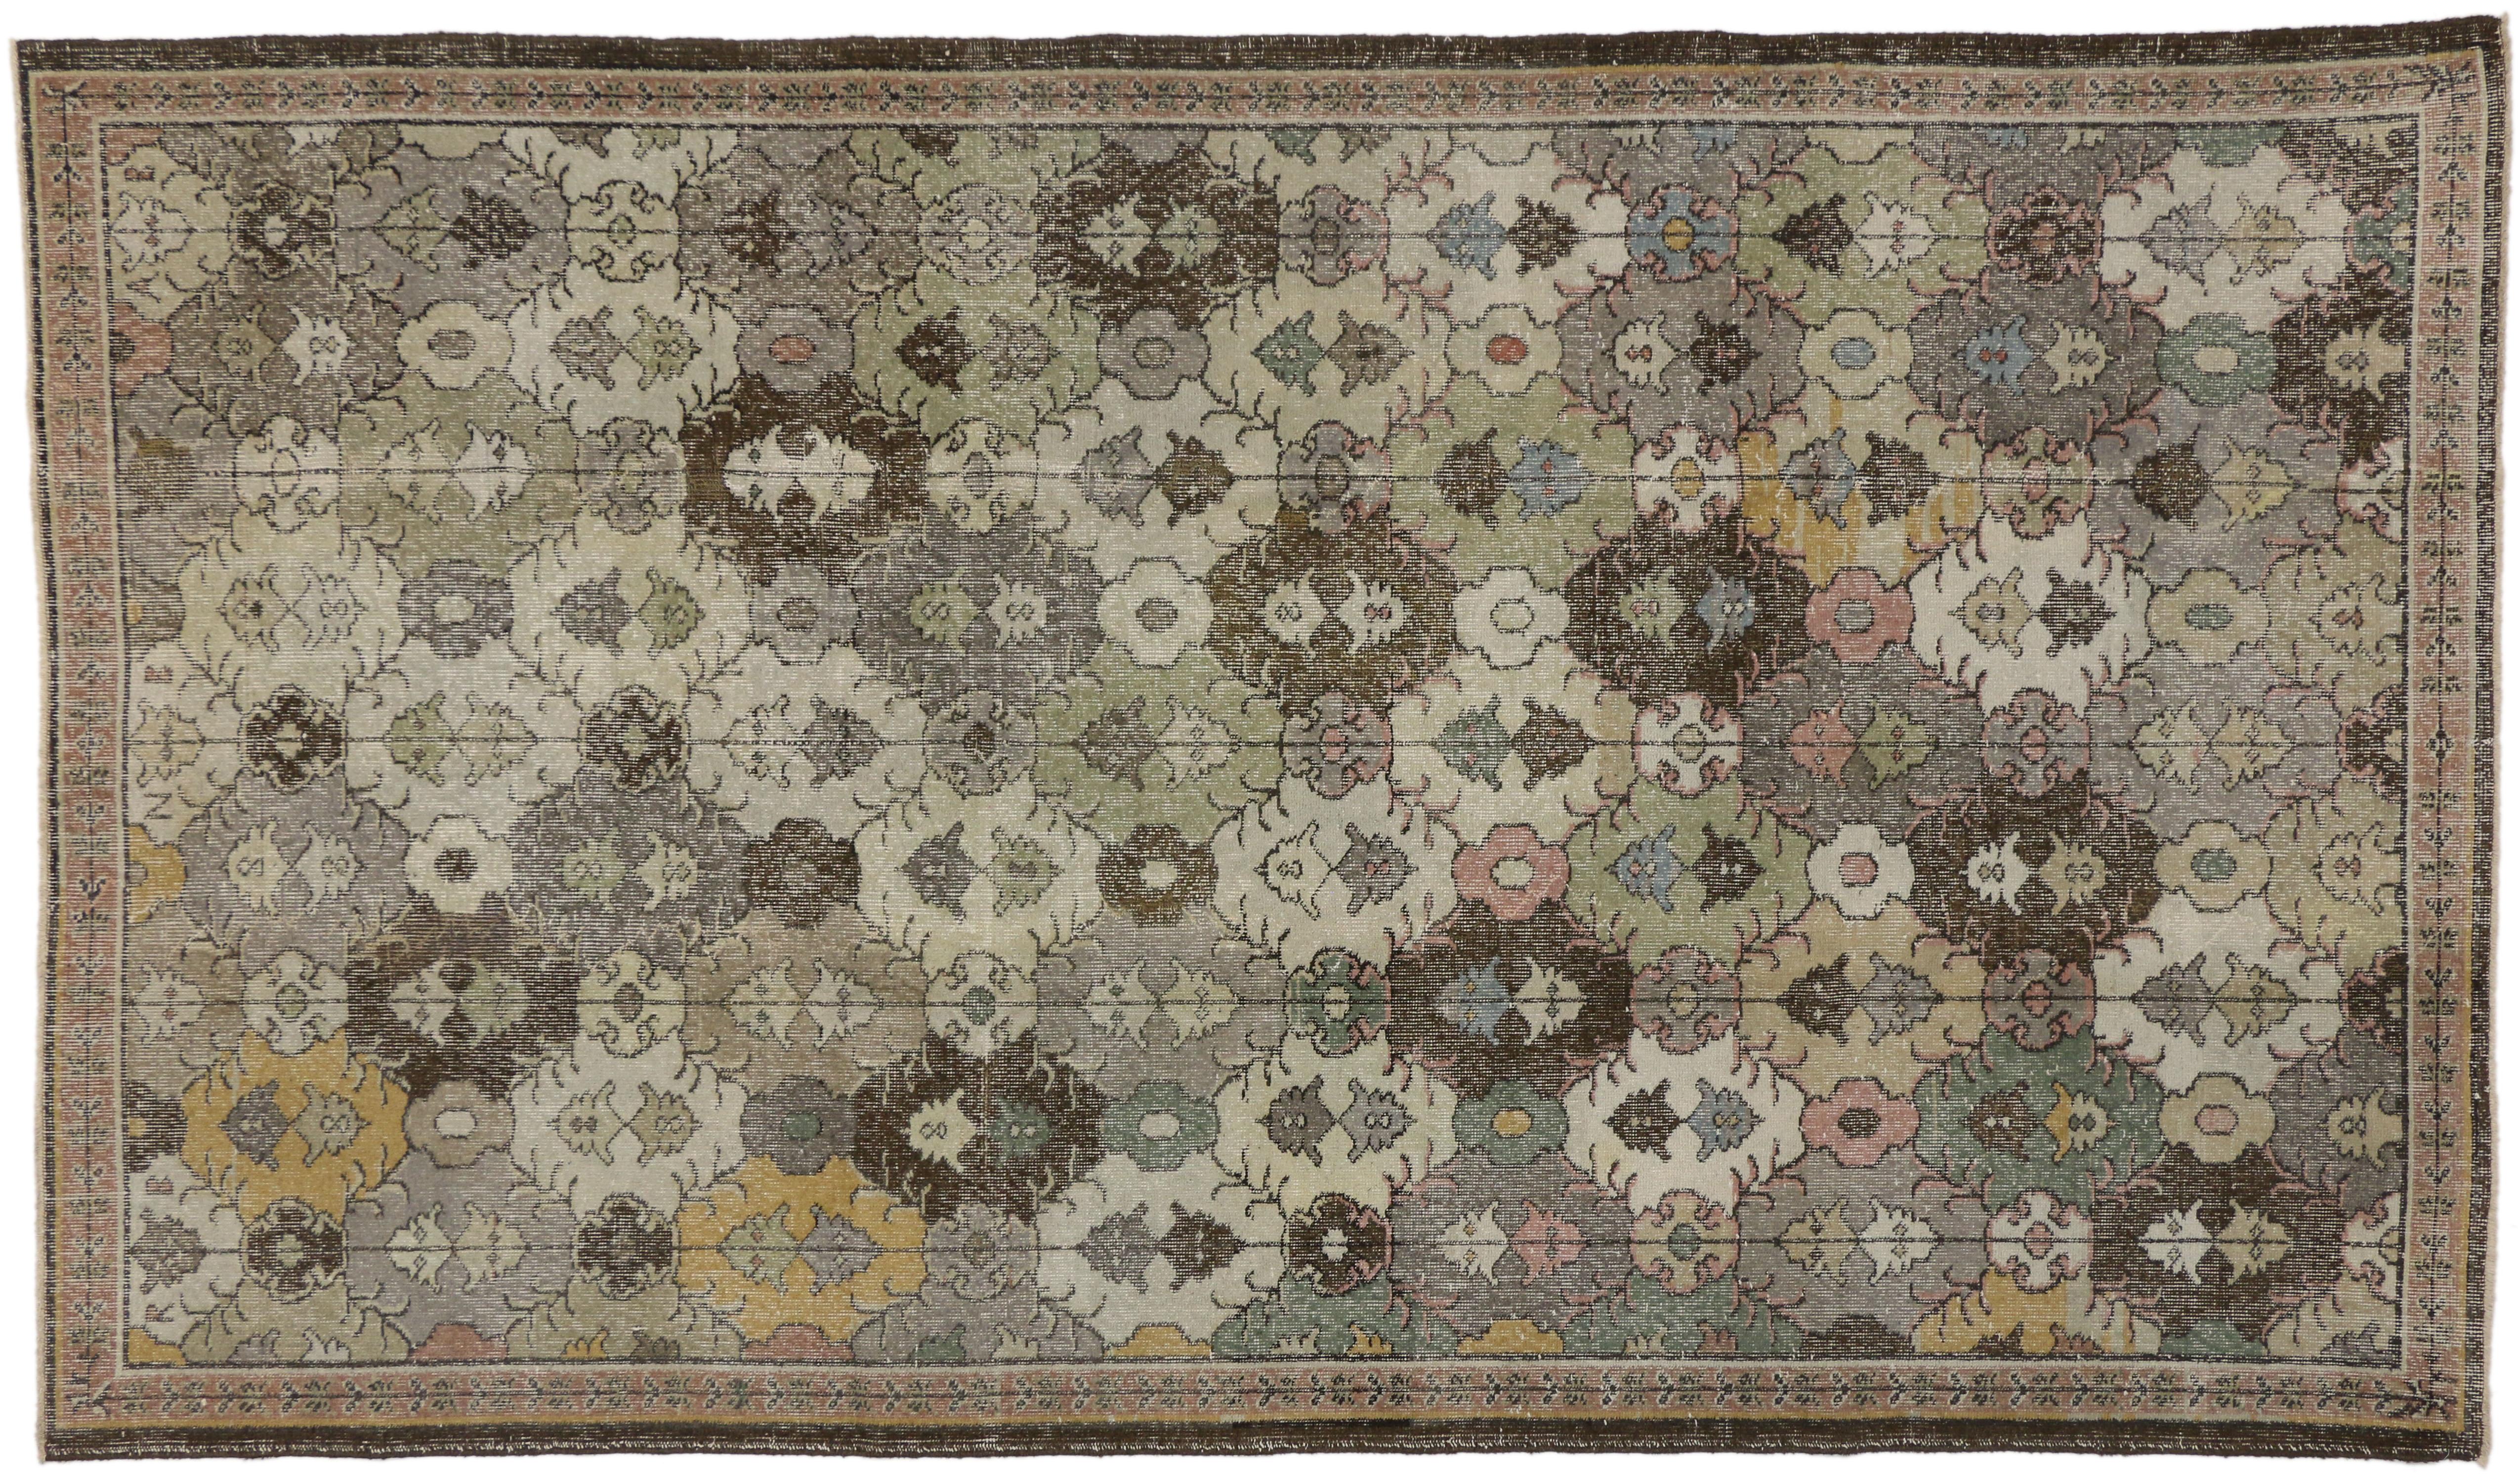 50873 Zeki Muren Distressed Vintage Turkish Sivas Rug with Industrial Art Deco Style. Warm and inviting combined with a bold pattern, this hand knotted wool distressed vintage Turkish Sivas rug embodies Art Deco style with a modern artisan twist. It